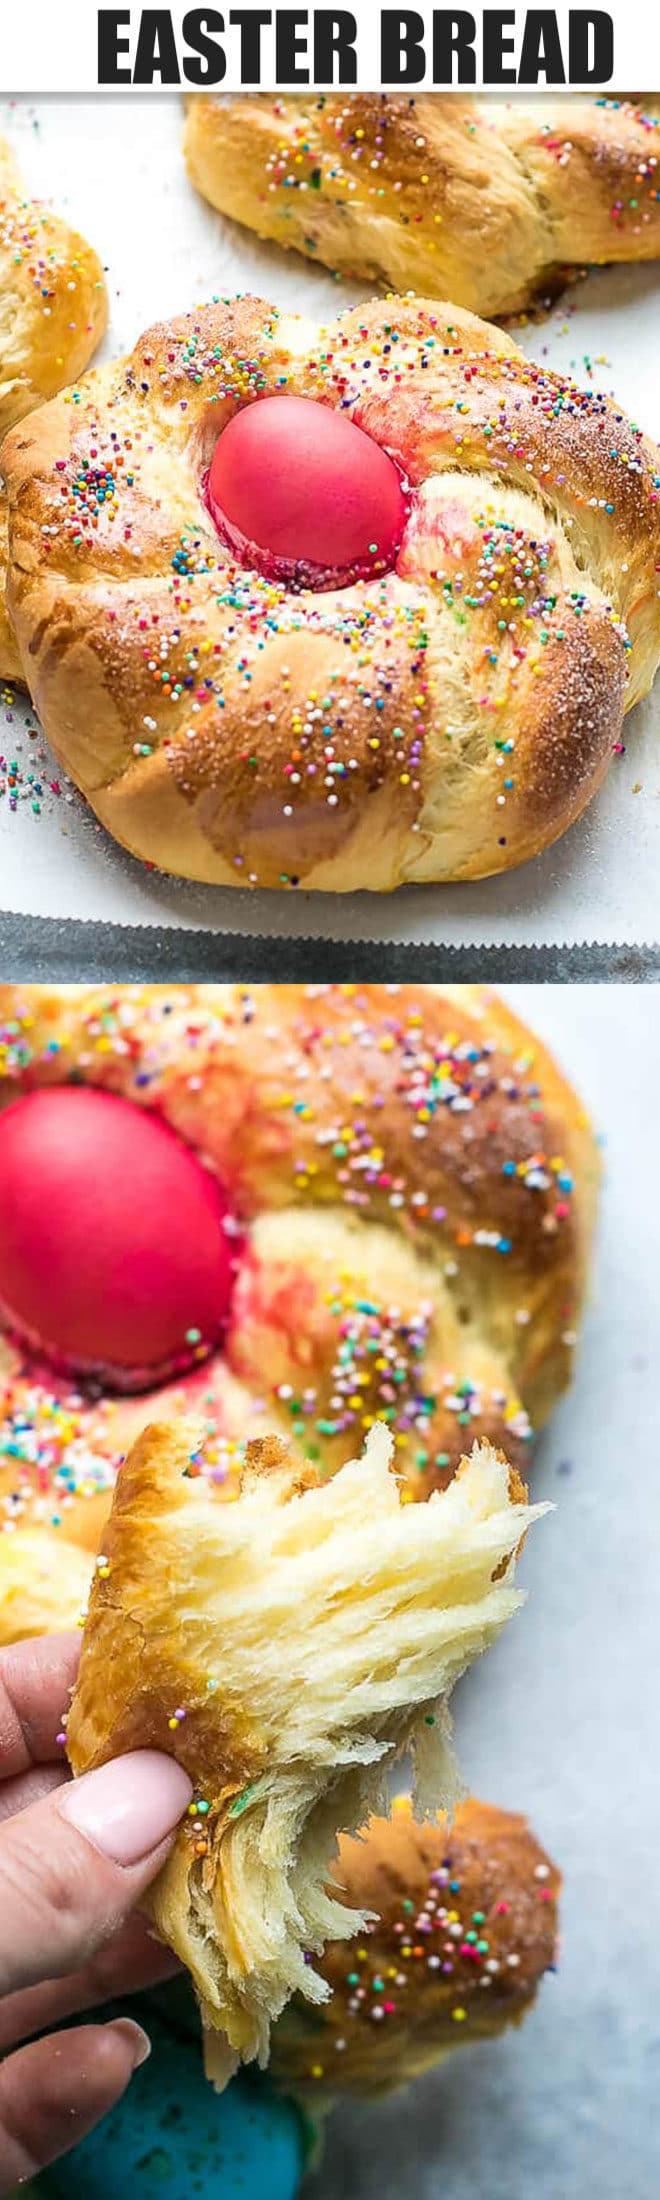 BRAIDED EASTER BREAD WITH COLORED EGG IN THE MIDDLE